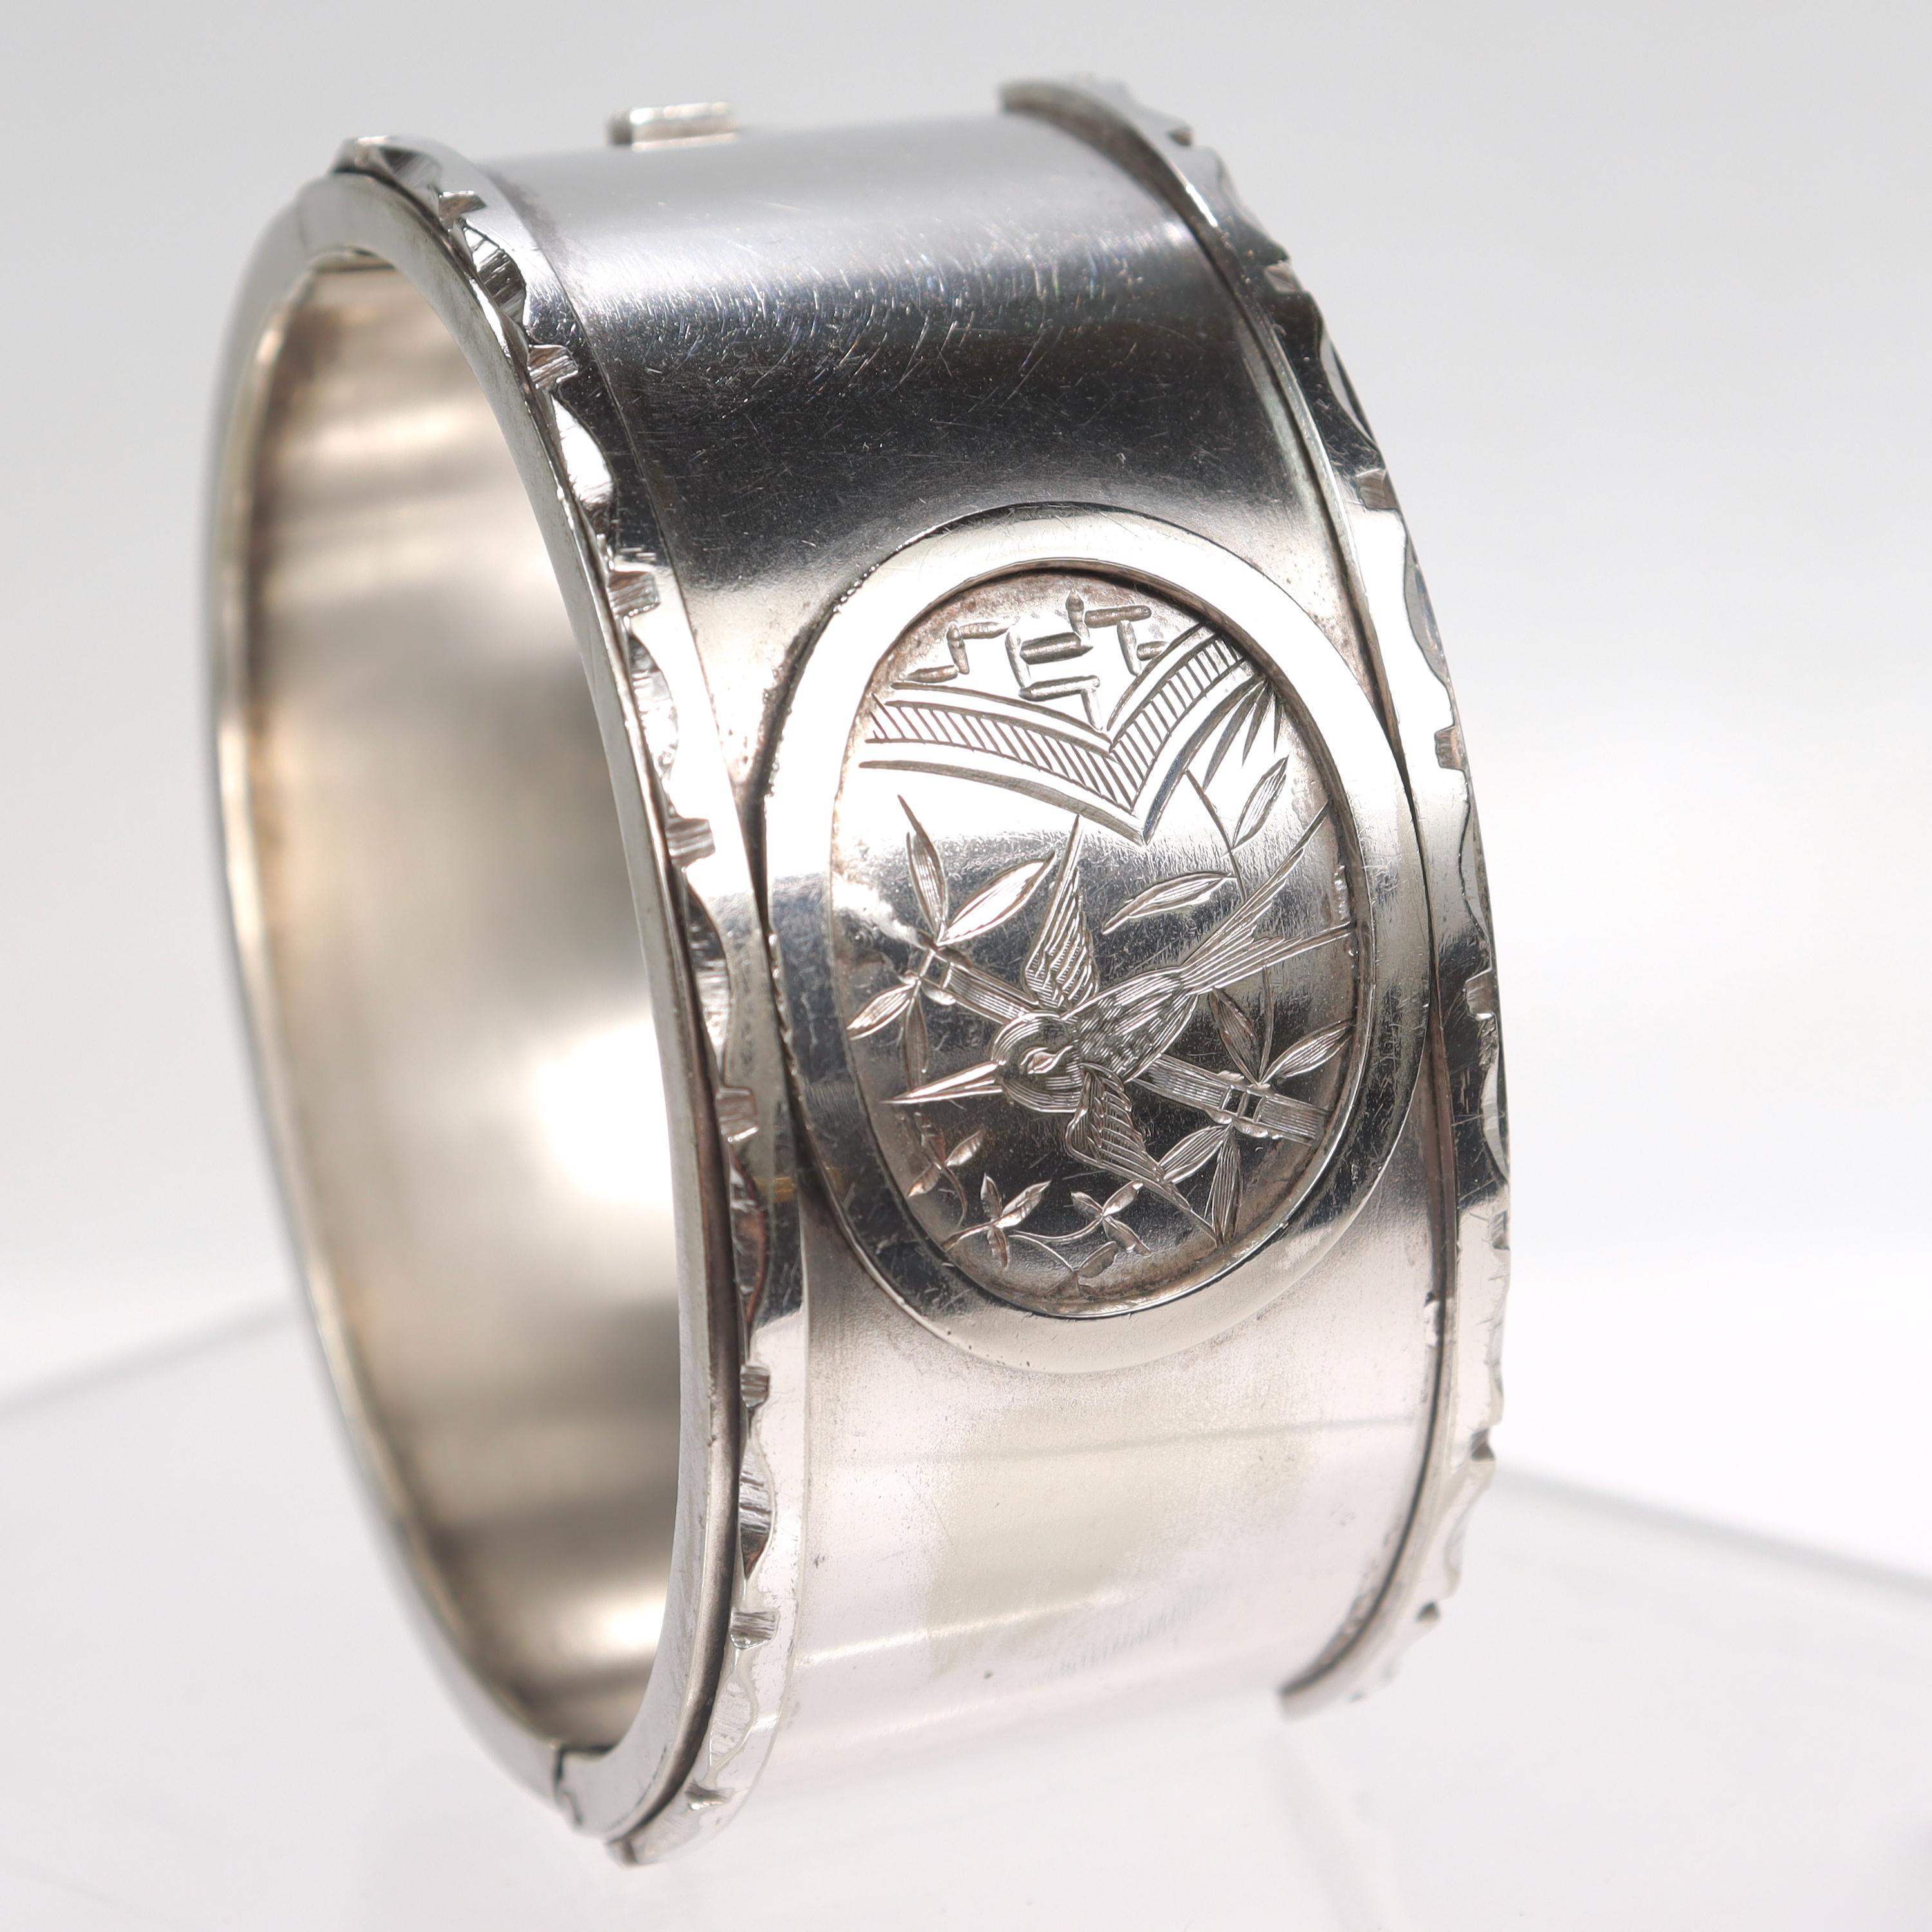 A fine, antique Aesthetic Period bangle bracelet.

In sterling silver.

With an engraved Japonismé pattern including a bird and leaves in a oval cartouche to the center of cuff. Each outside edge is finished with a repeating, notched pattern.

Opens